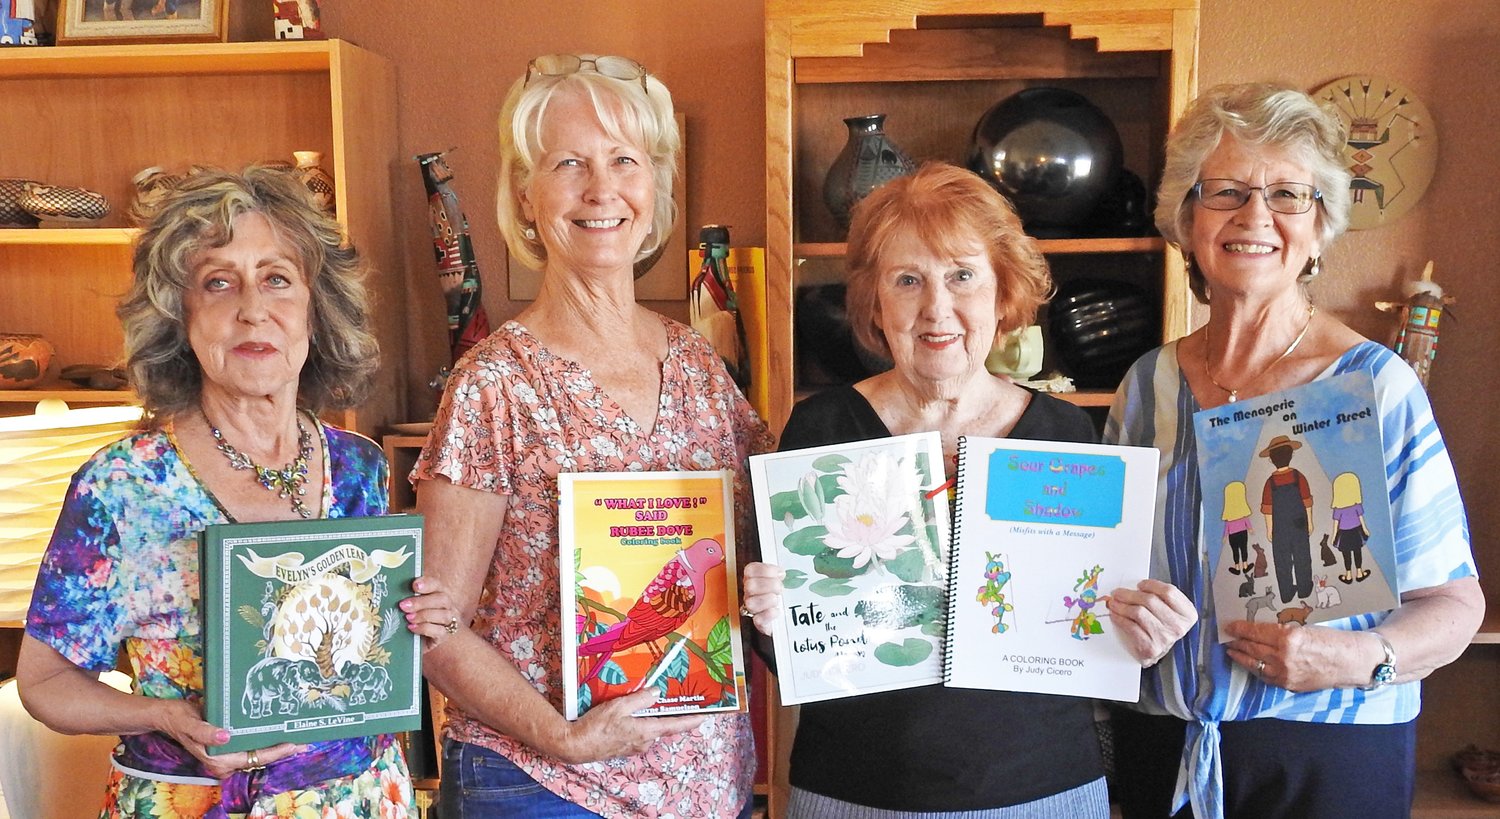 Las Cruces authors with their books are, left to right, Elaine S. LeVine, Charmayne Samuelson, Judy Cicero and Rosemary Matos.